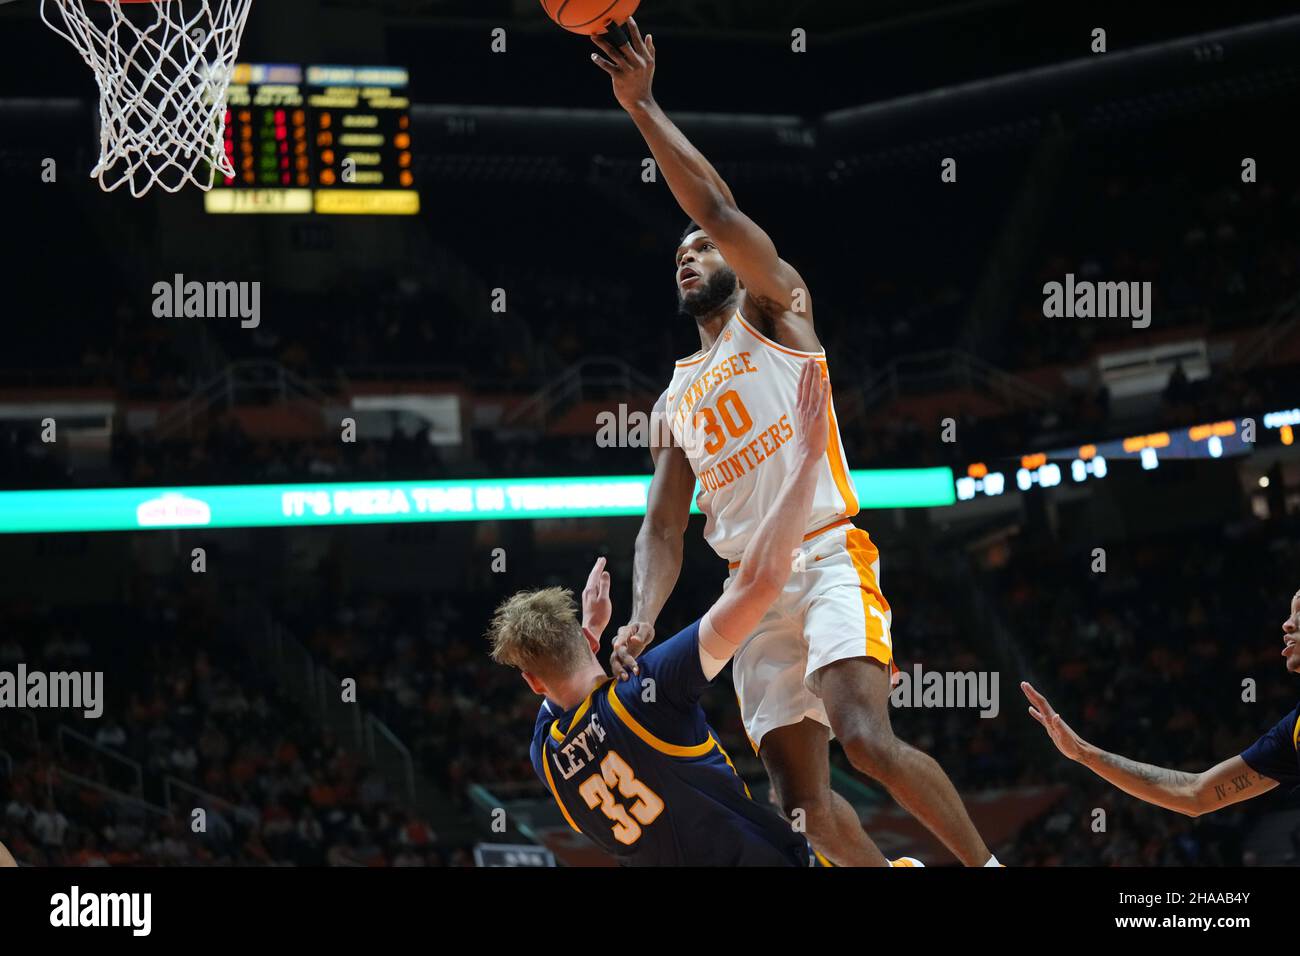 December 11, 2021: Josiah-Jordan James #30 of the Tennessee Volunteers shoots the ball over Bas Leyte #33 of the UNC-Greensboro Spartans during the NCAA basketball game between the University of Tennessee Volunteers and the University of North Carolina at Greensboro Spartans at Thompson-Boling Arena in Knoxville TN Tim Gangloff/CSM Stock Photo